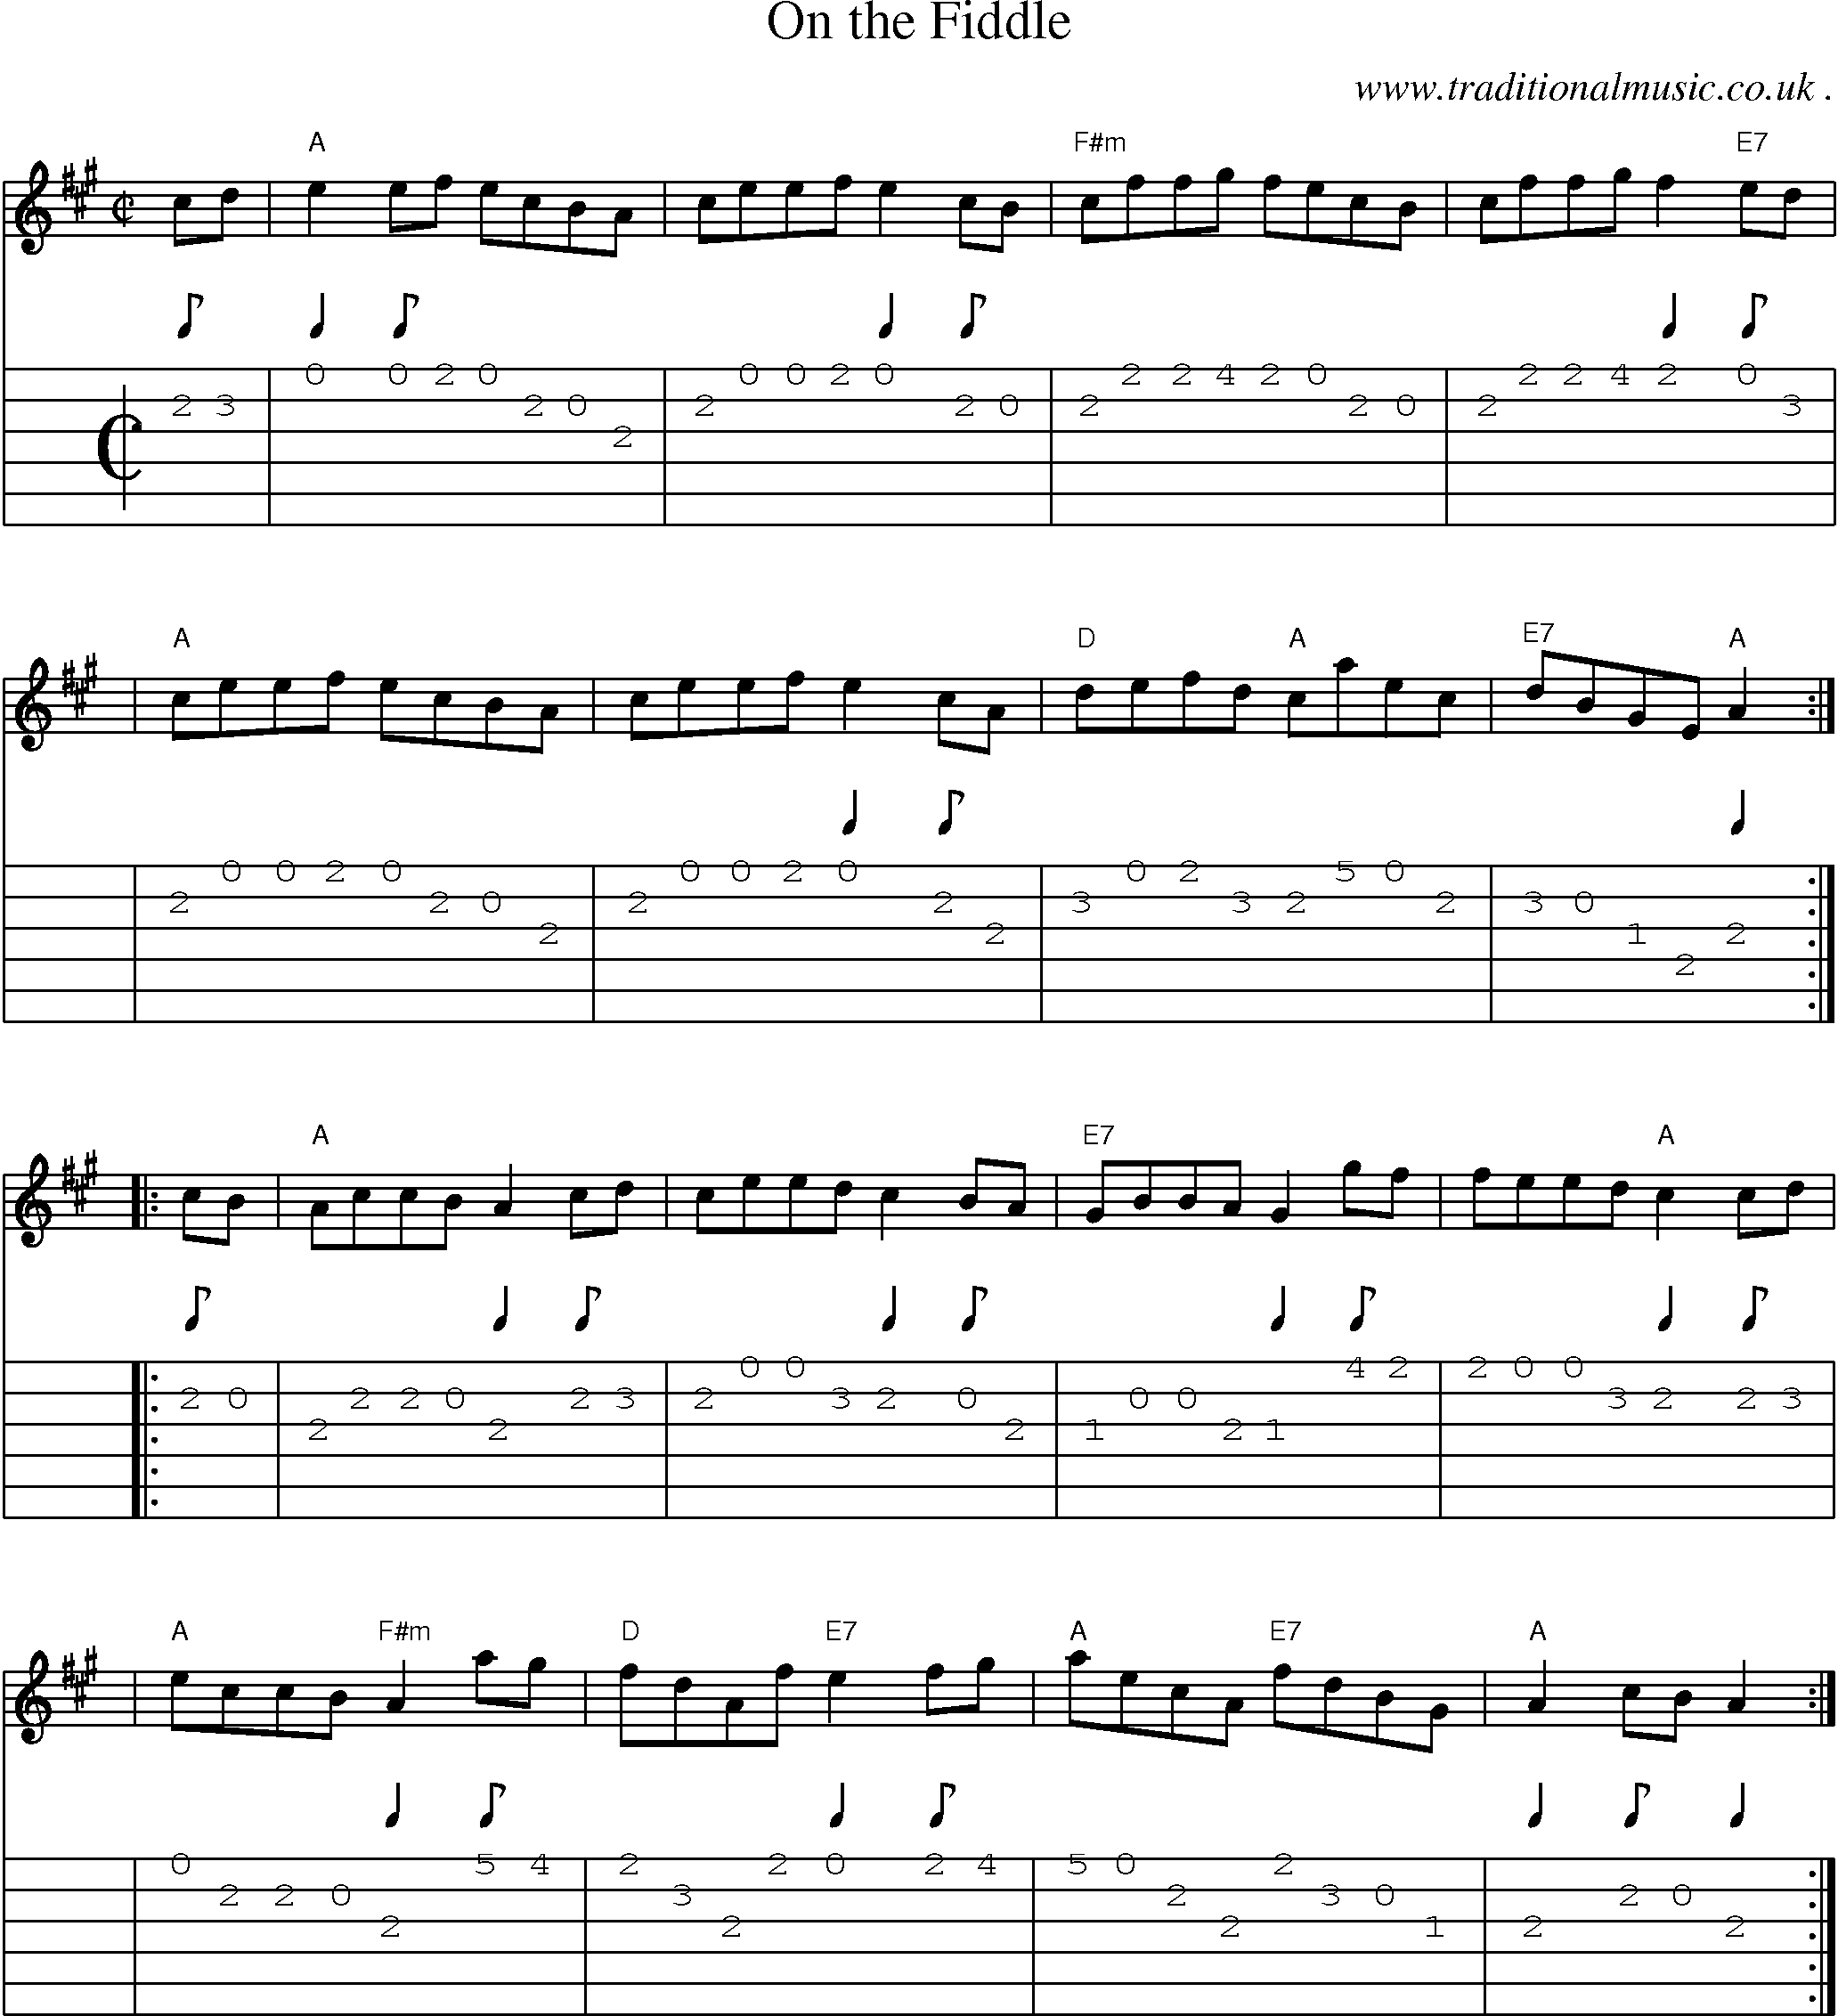 Sheet-music  score, Chords and Guitar Tabs for On The Fiddle